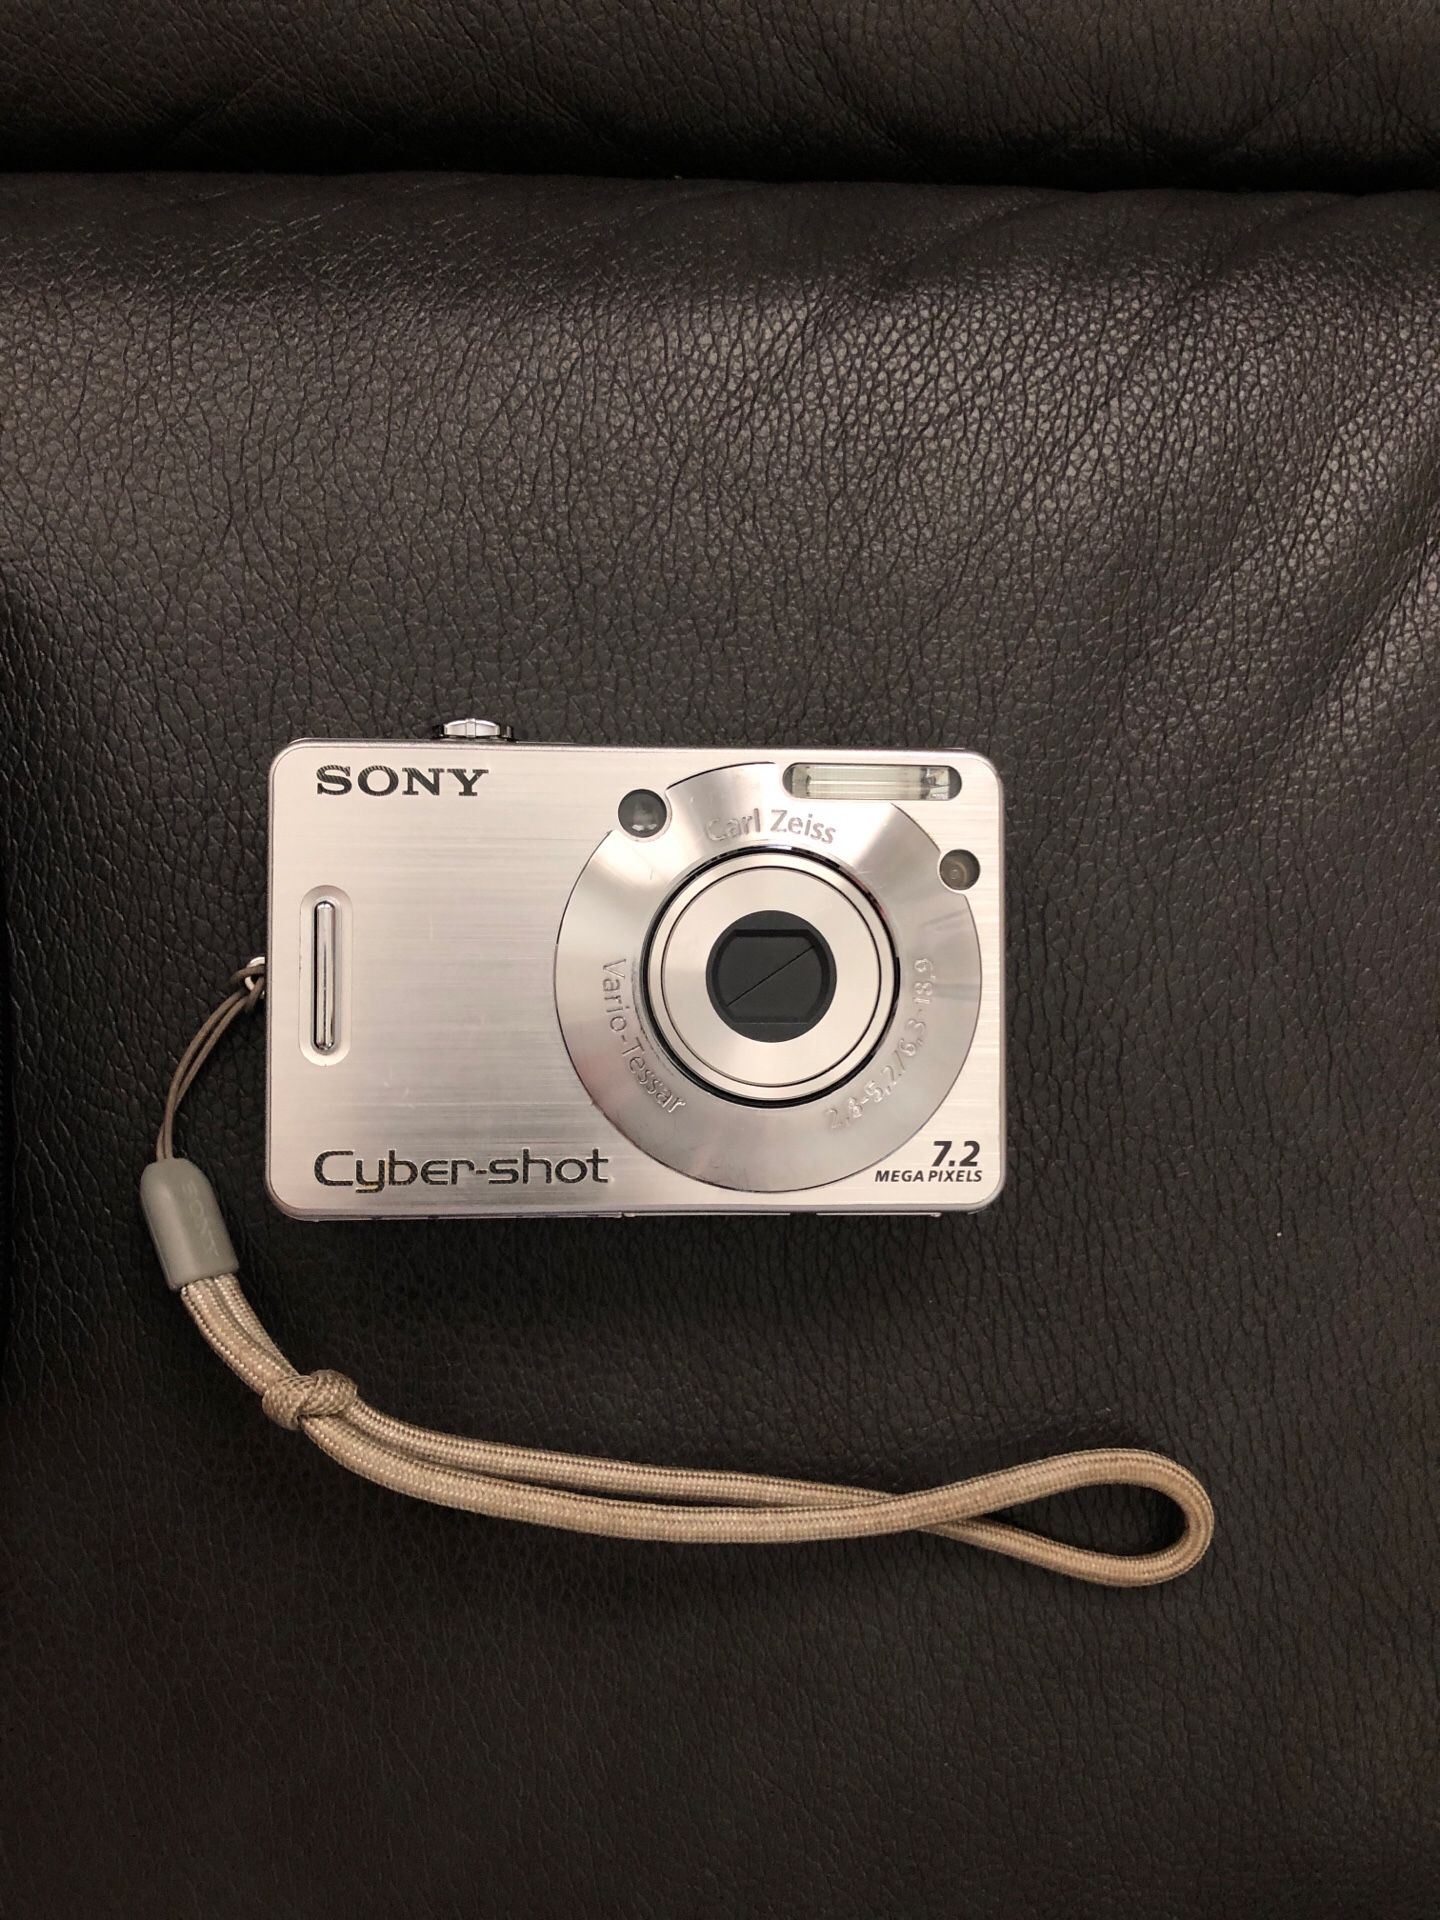 Sony Cyber-shot Digital camera in great condition!